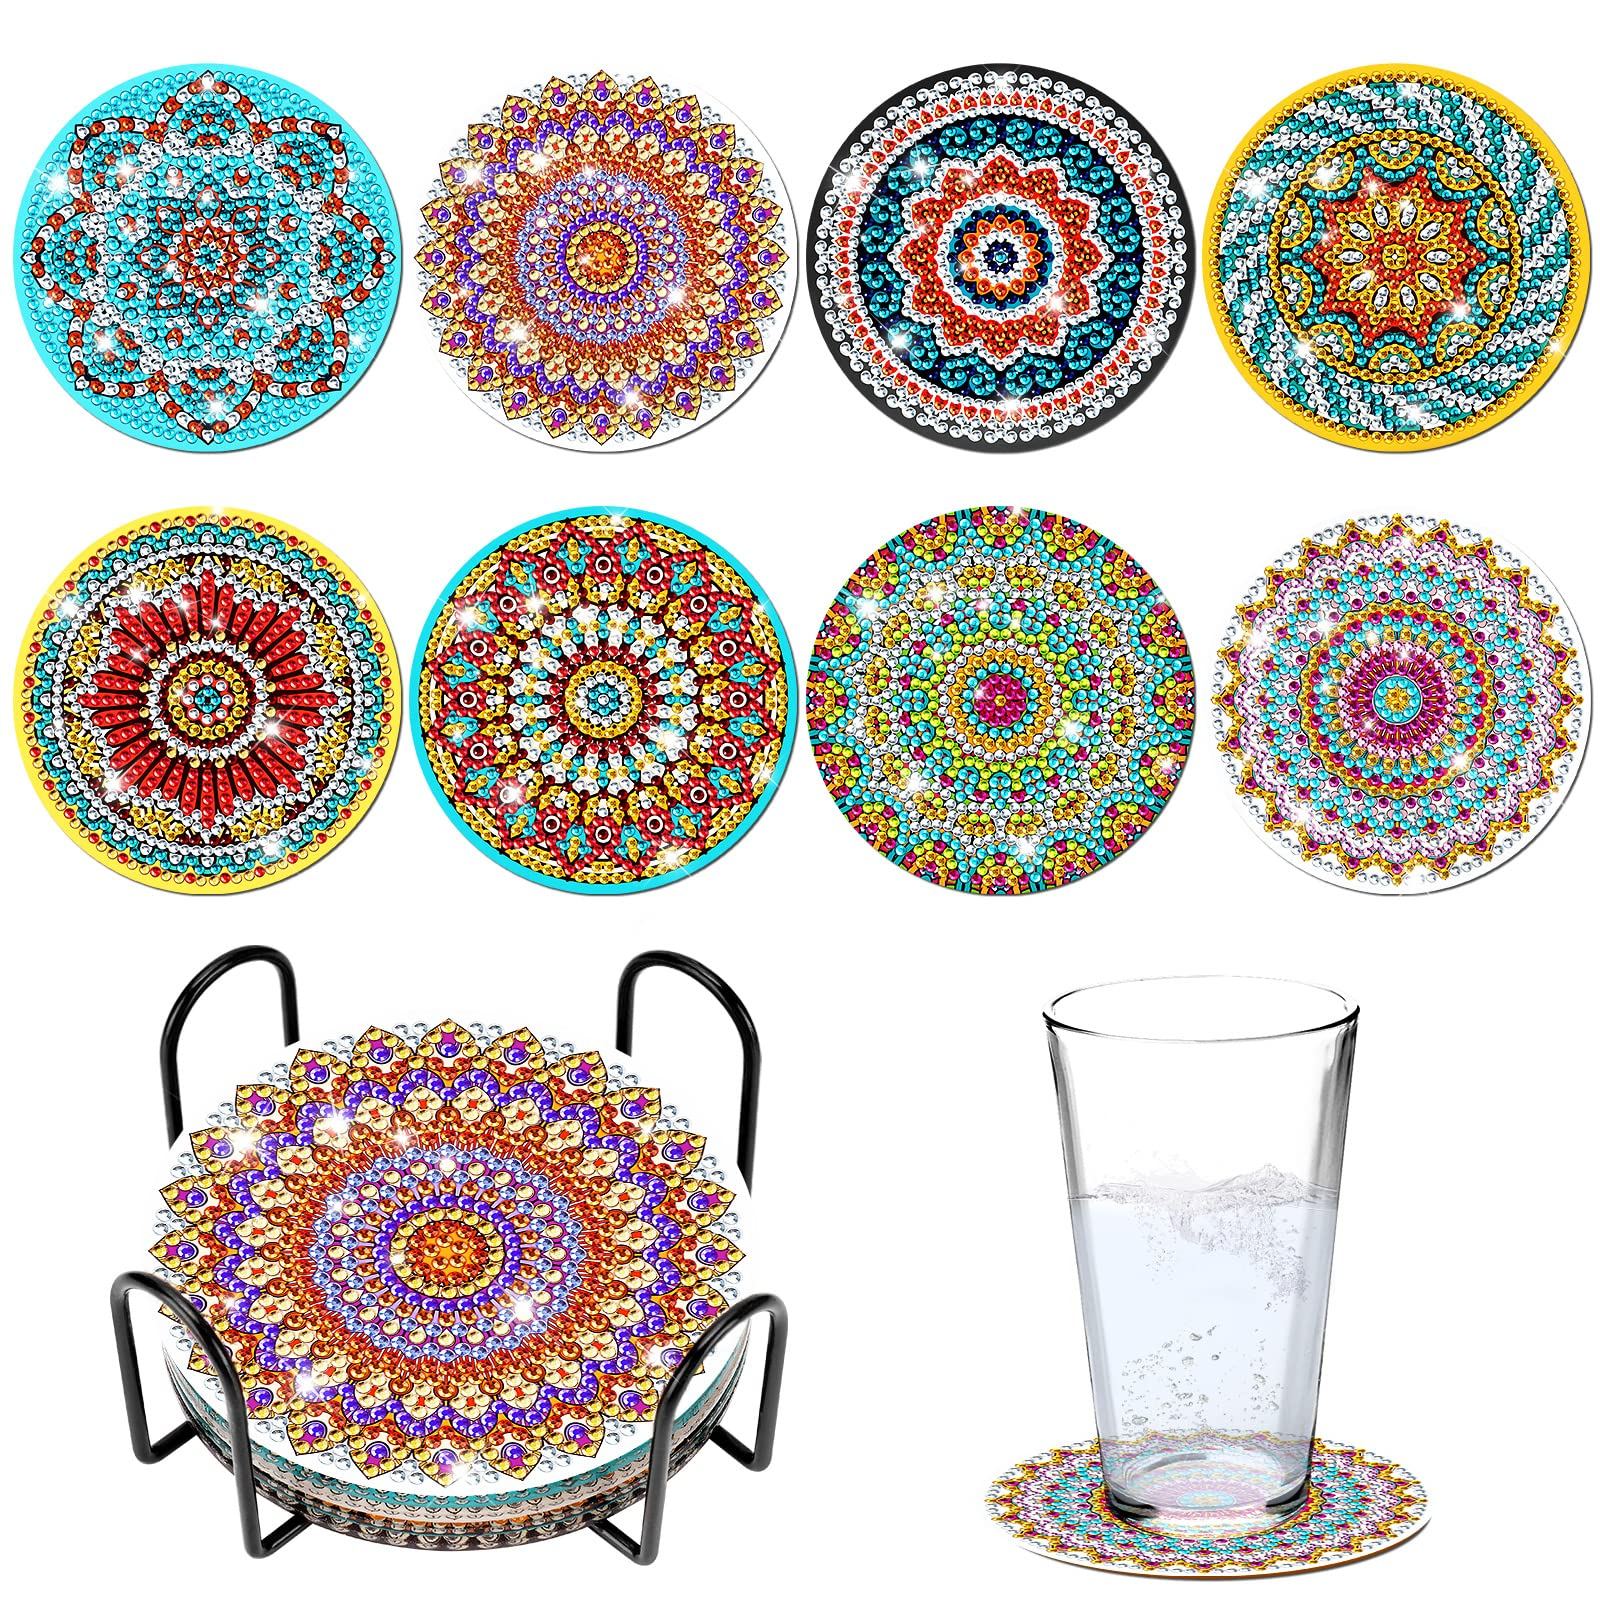 VEGCOO 8 Pcs Diamond Painting Coasters with Holder, DIY Mandala Coasters Diamond  Painting Kits for Beginners, Adults & Kids Art Craft Supplies 